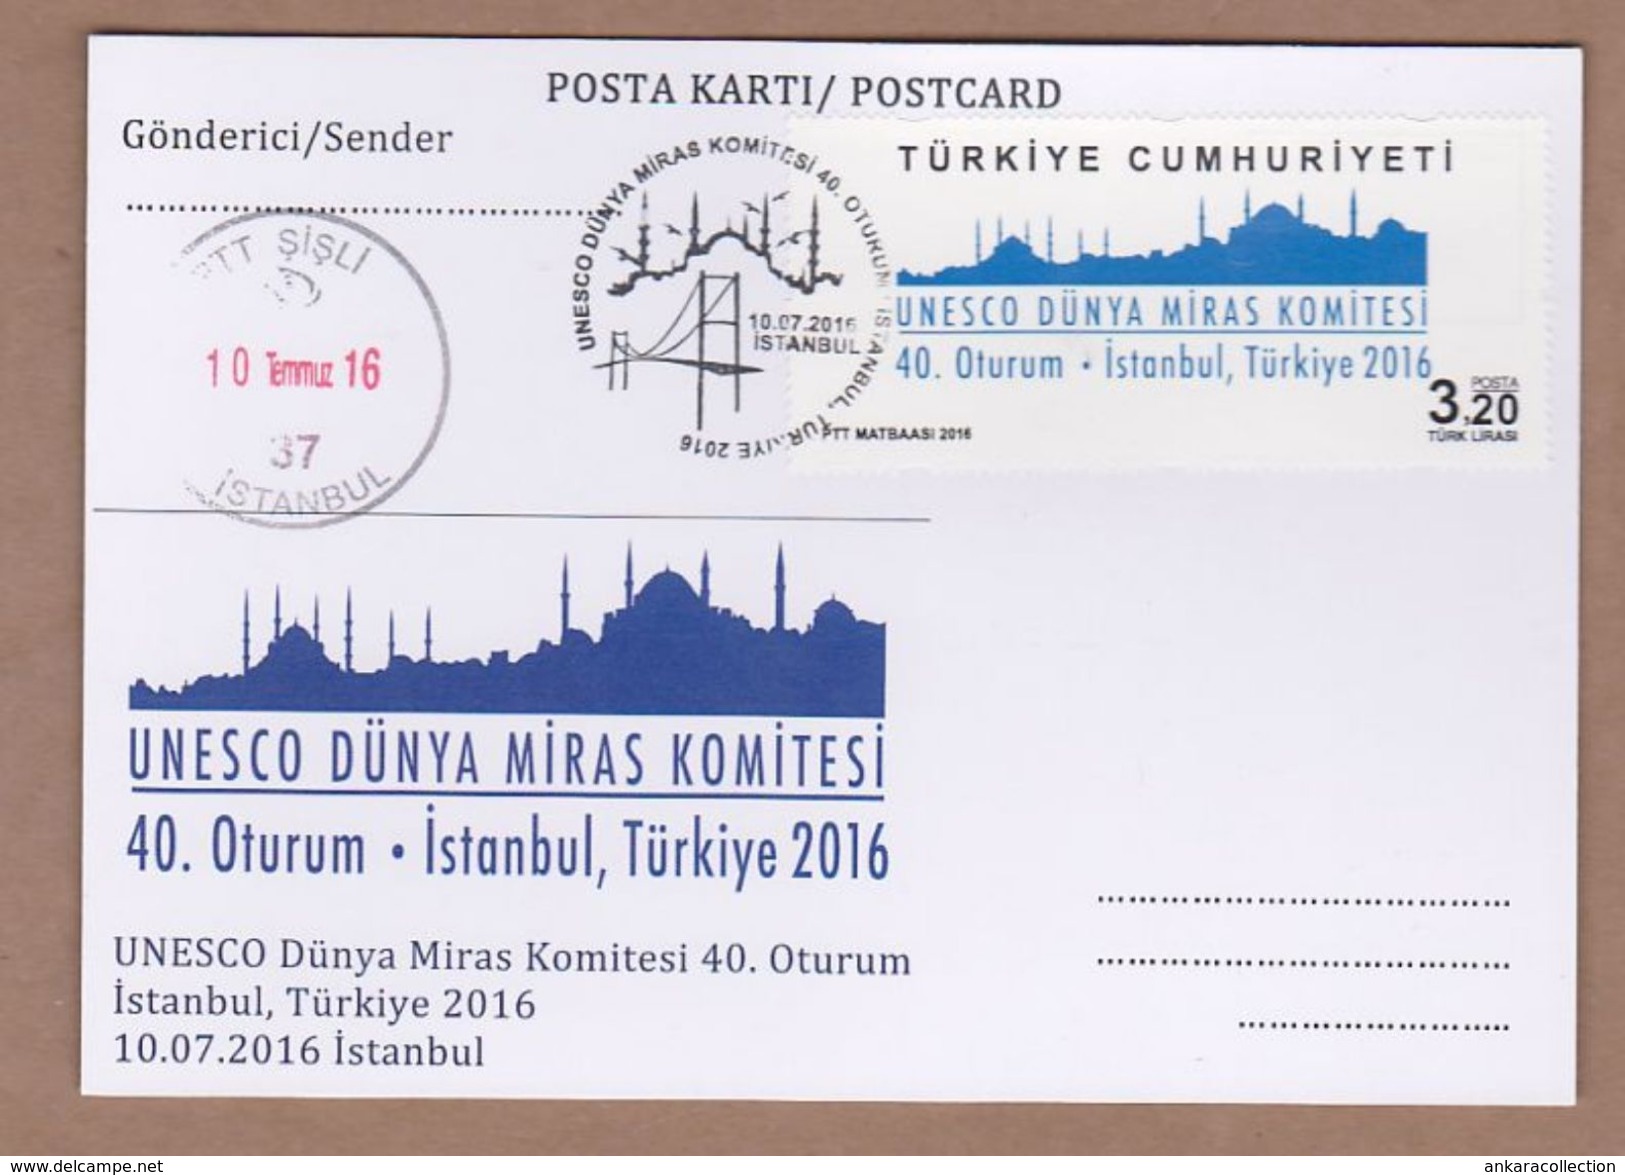 AC - TURKEY POSTAL STATIONARY - UNESCO WORLD HERITAGE COMMITTEE 40th SESSION ISTANBUL 10 JULY 2016 - Postal Stationery